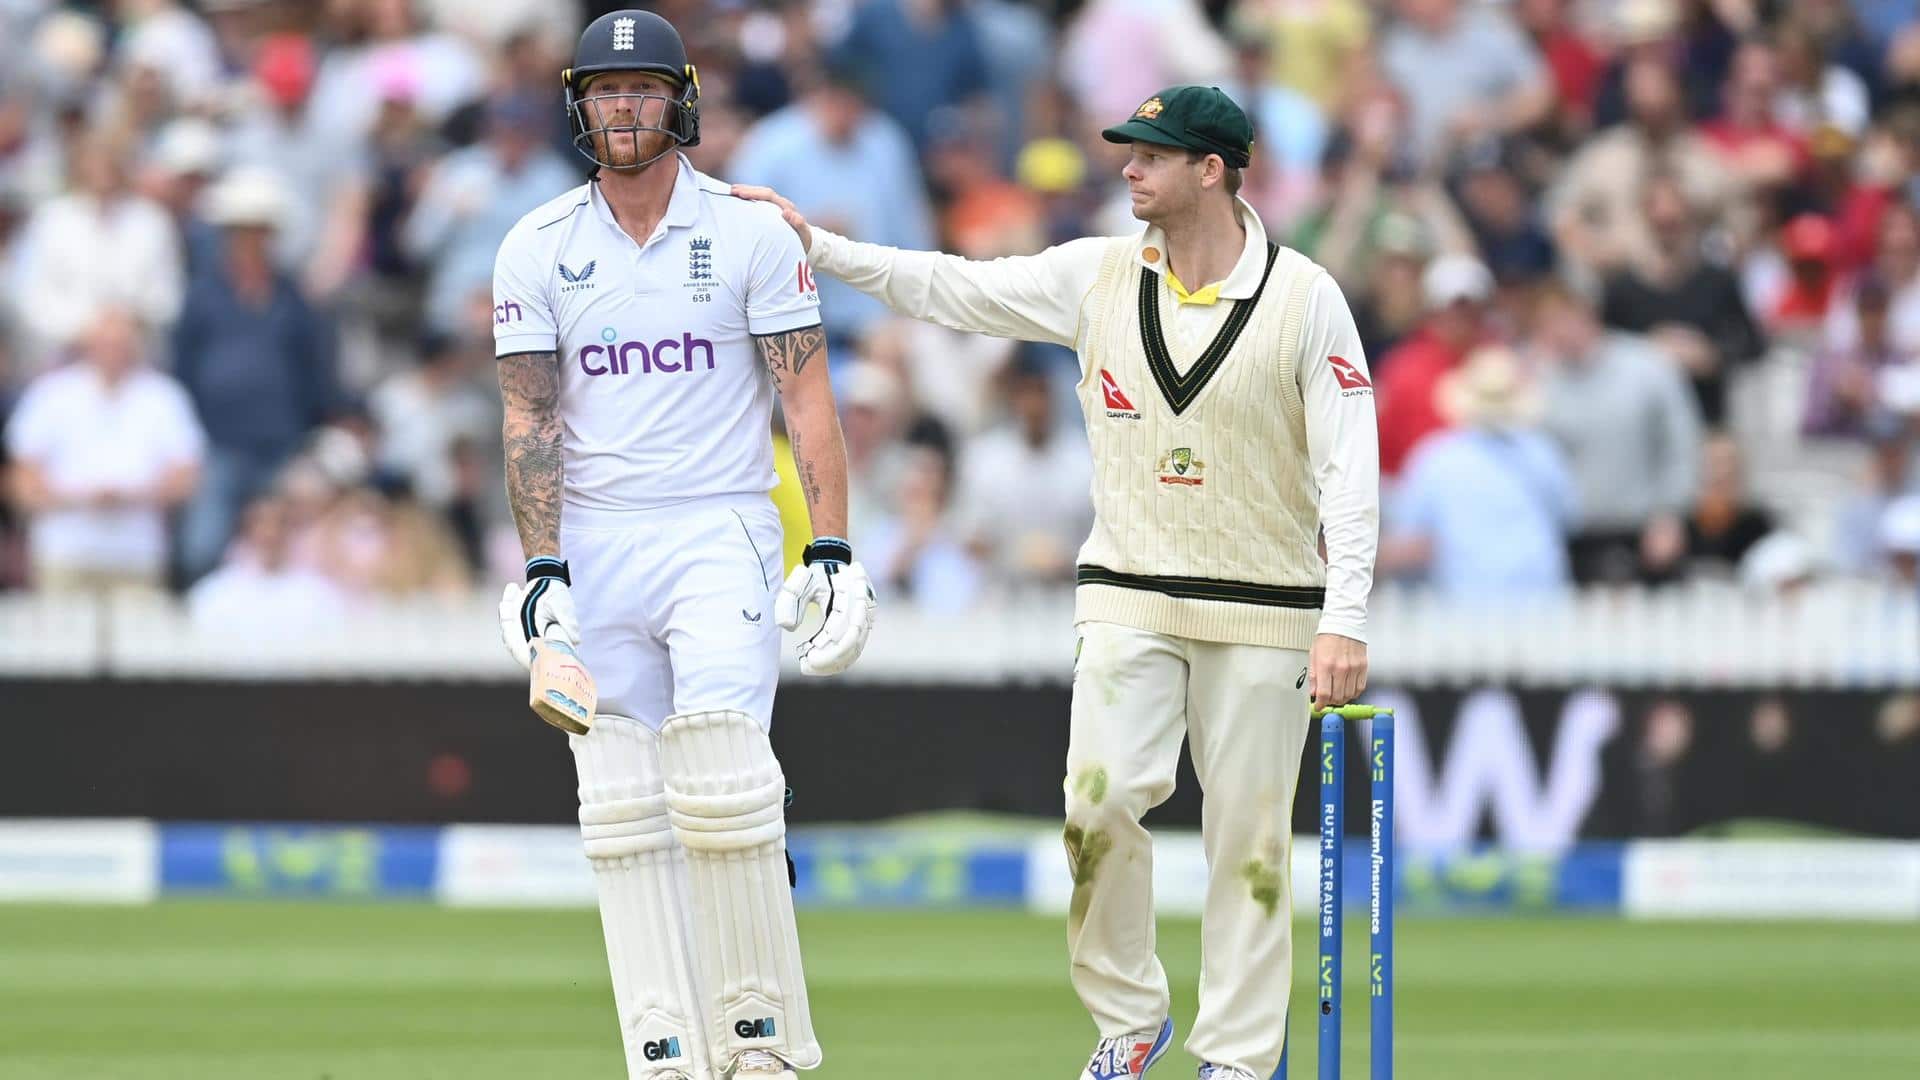 The Ashes: Australia extend unbeaten run at Lord's (since 2013)